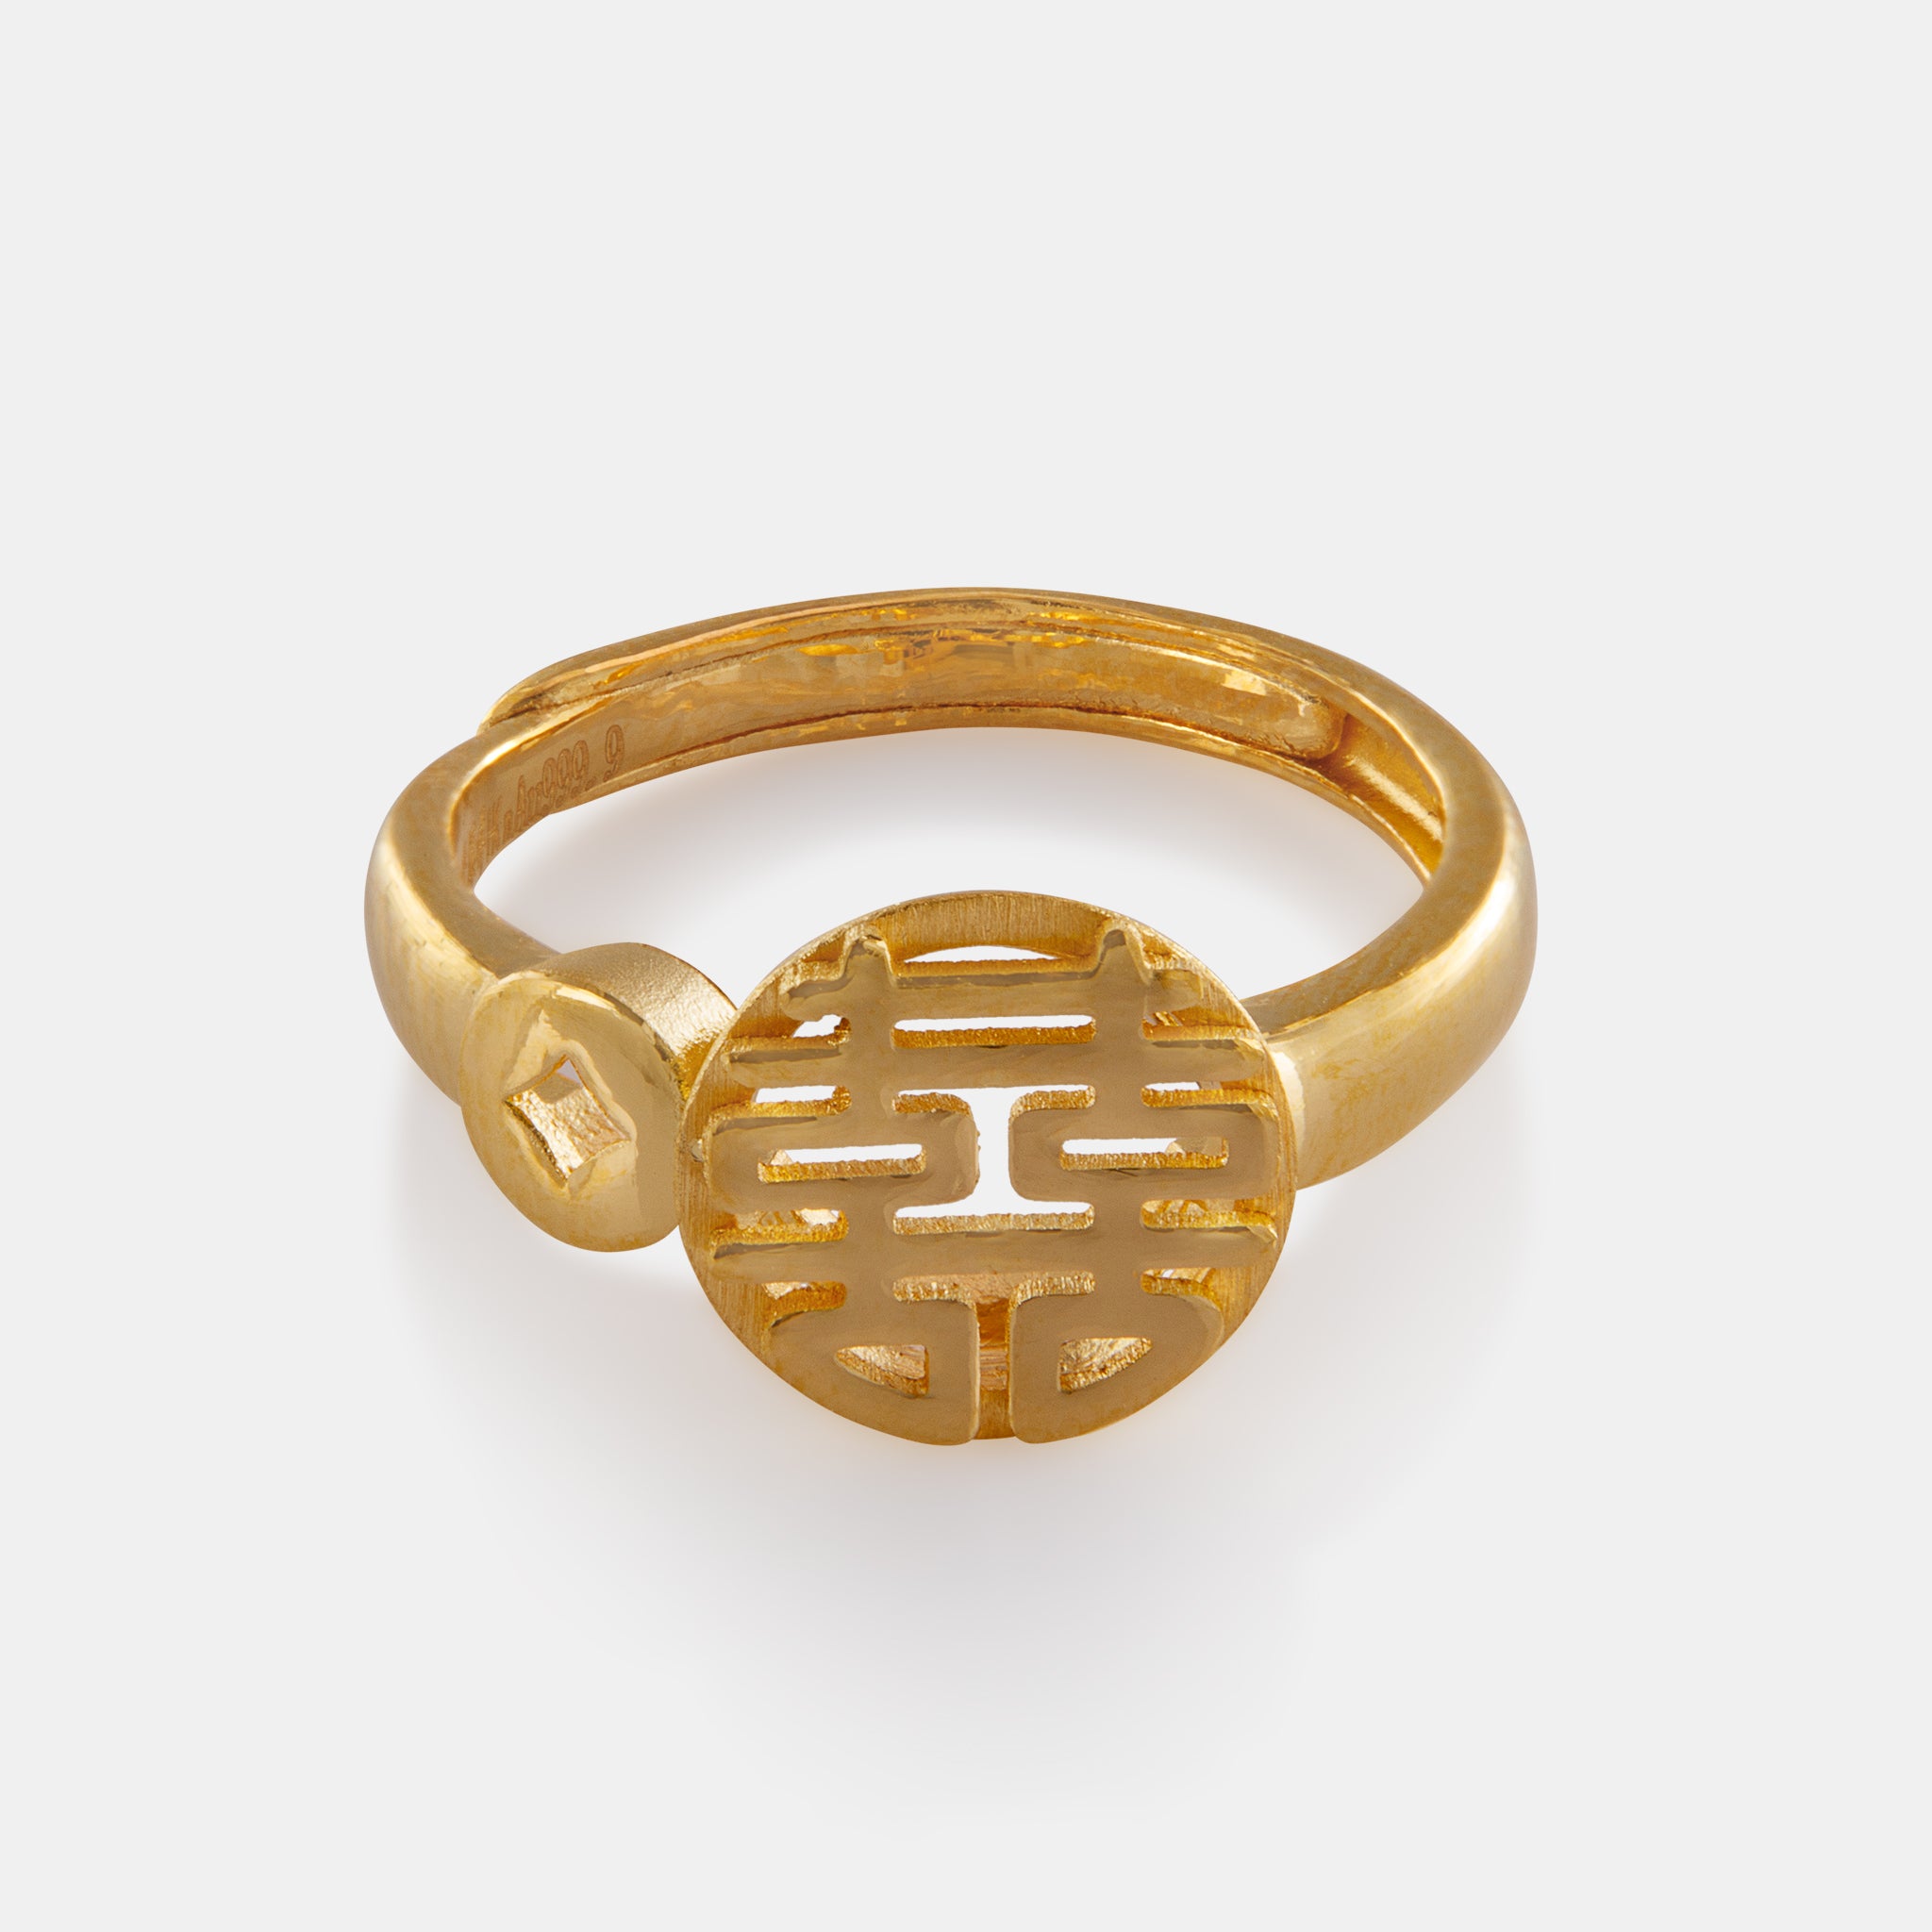 The Traditional Chinese Symbol of Wealth – Tomei Jewel